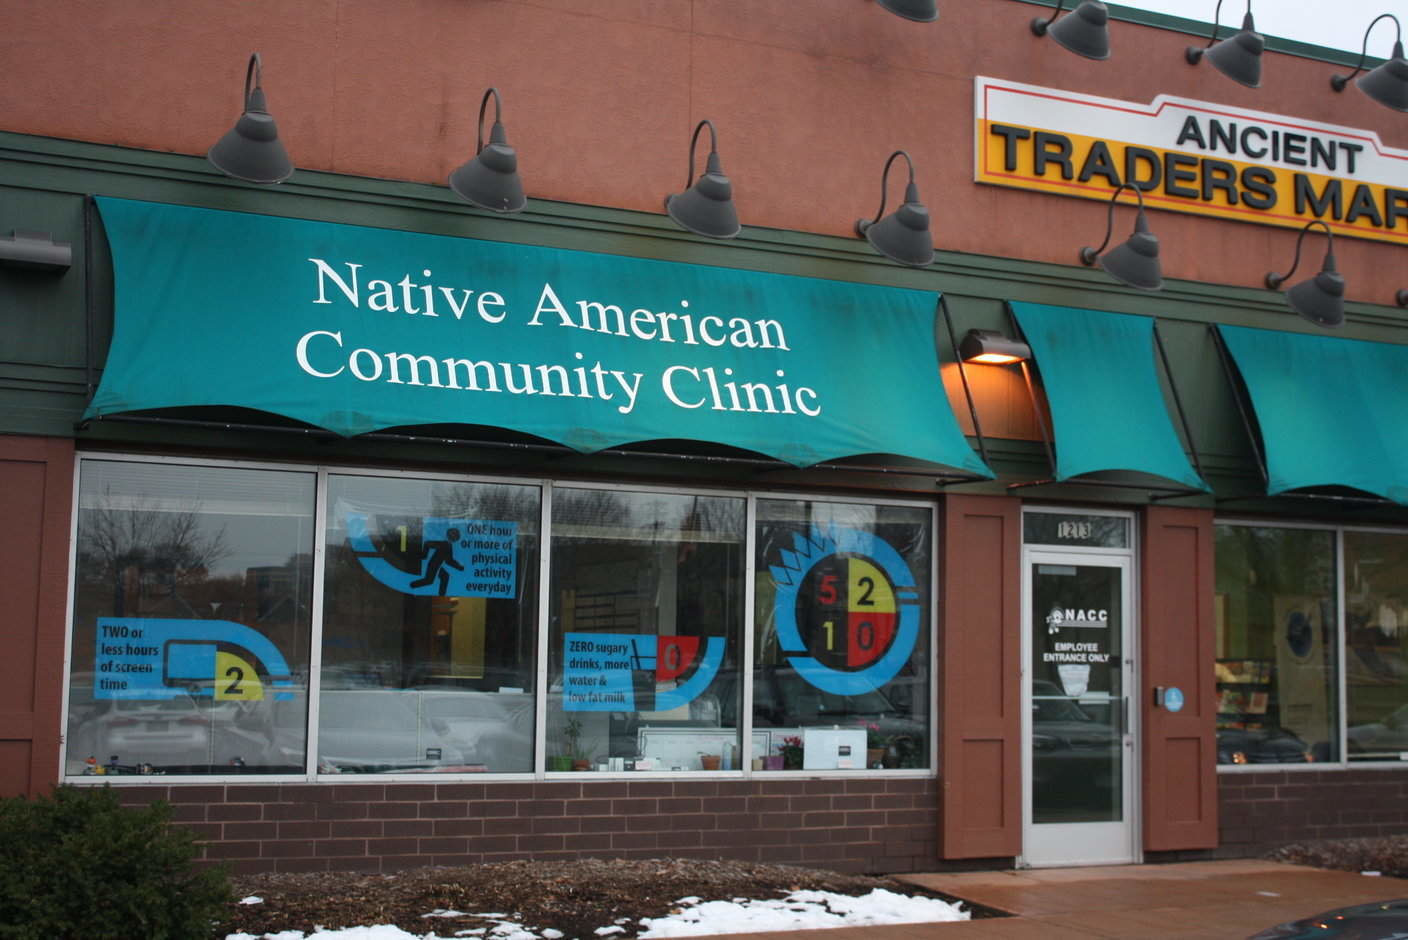 The Native American Community Clinic at 1213 East Franklin Ave. works to promote the health and wellness of mind, body and spirit of Native American families. (Photo submitted)